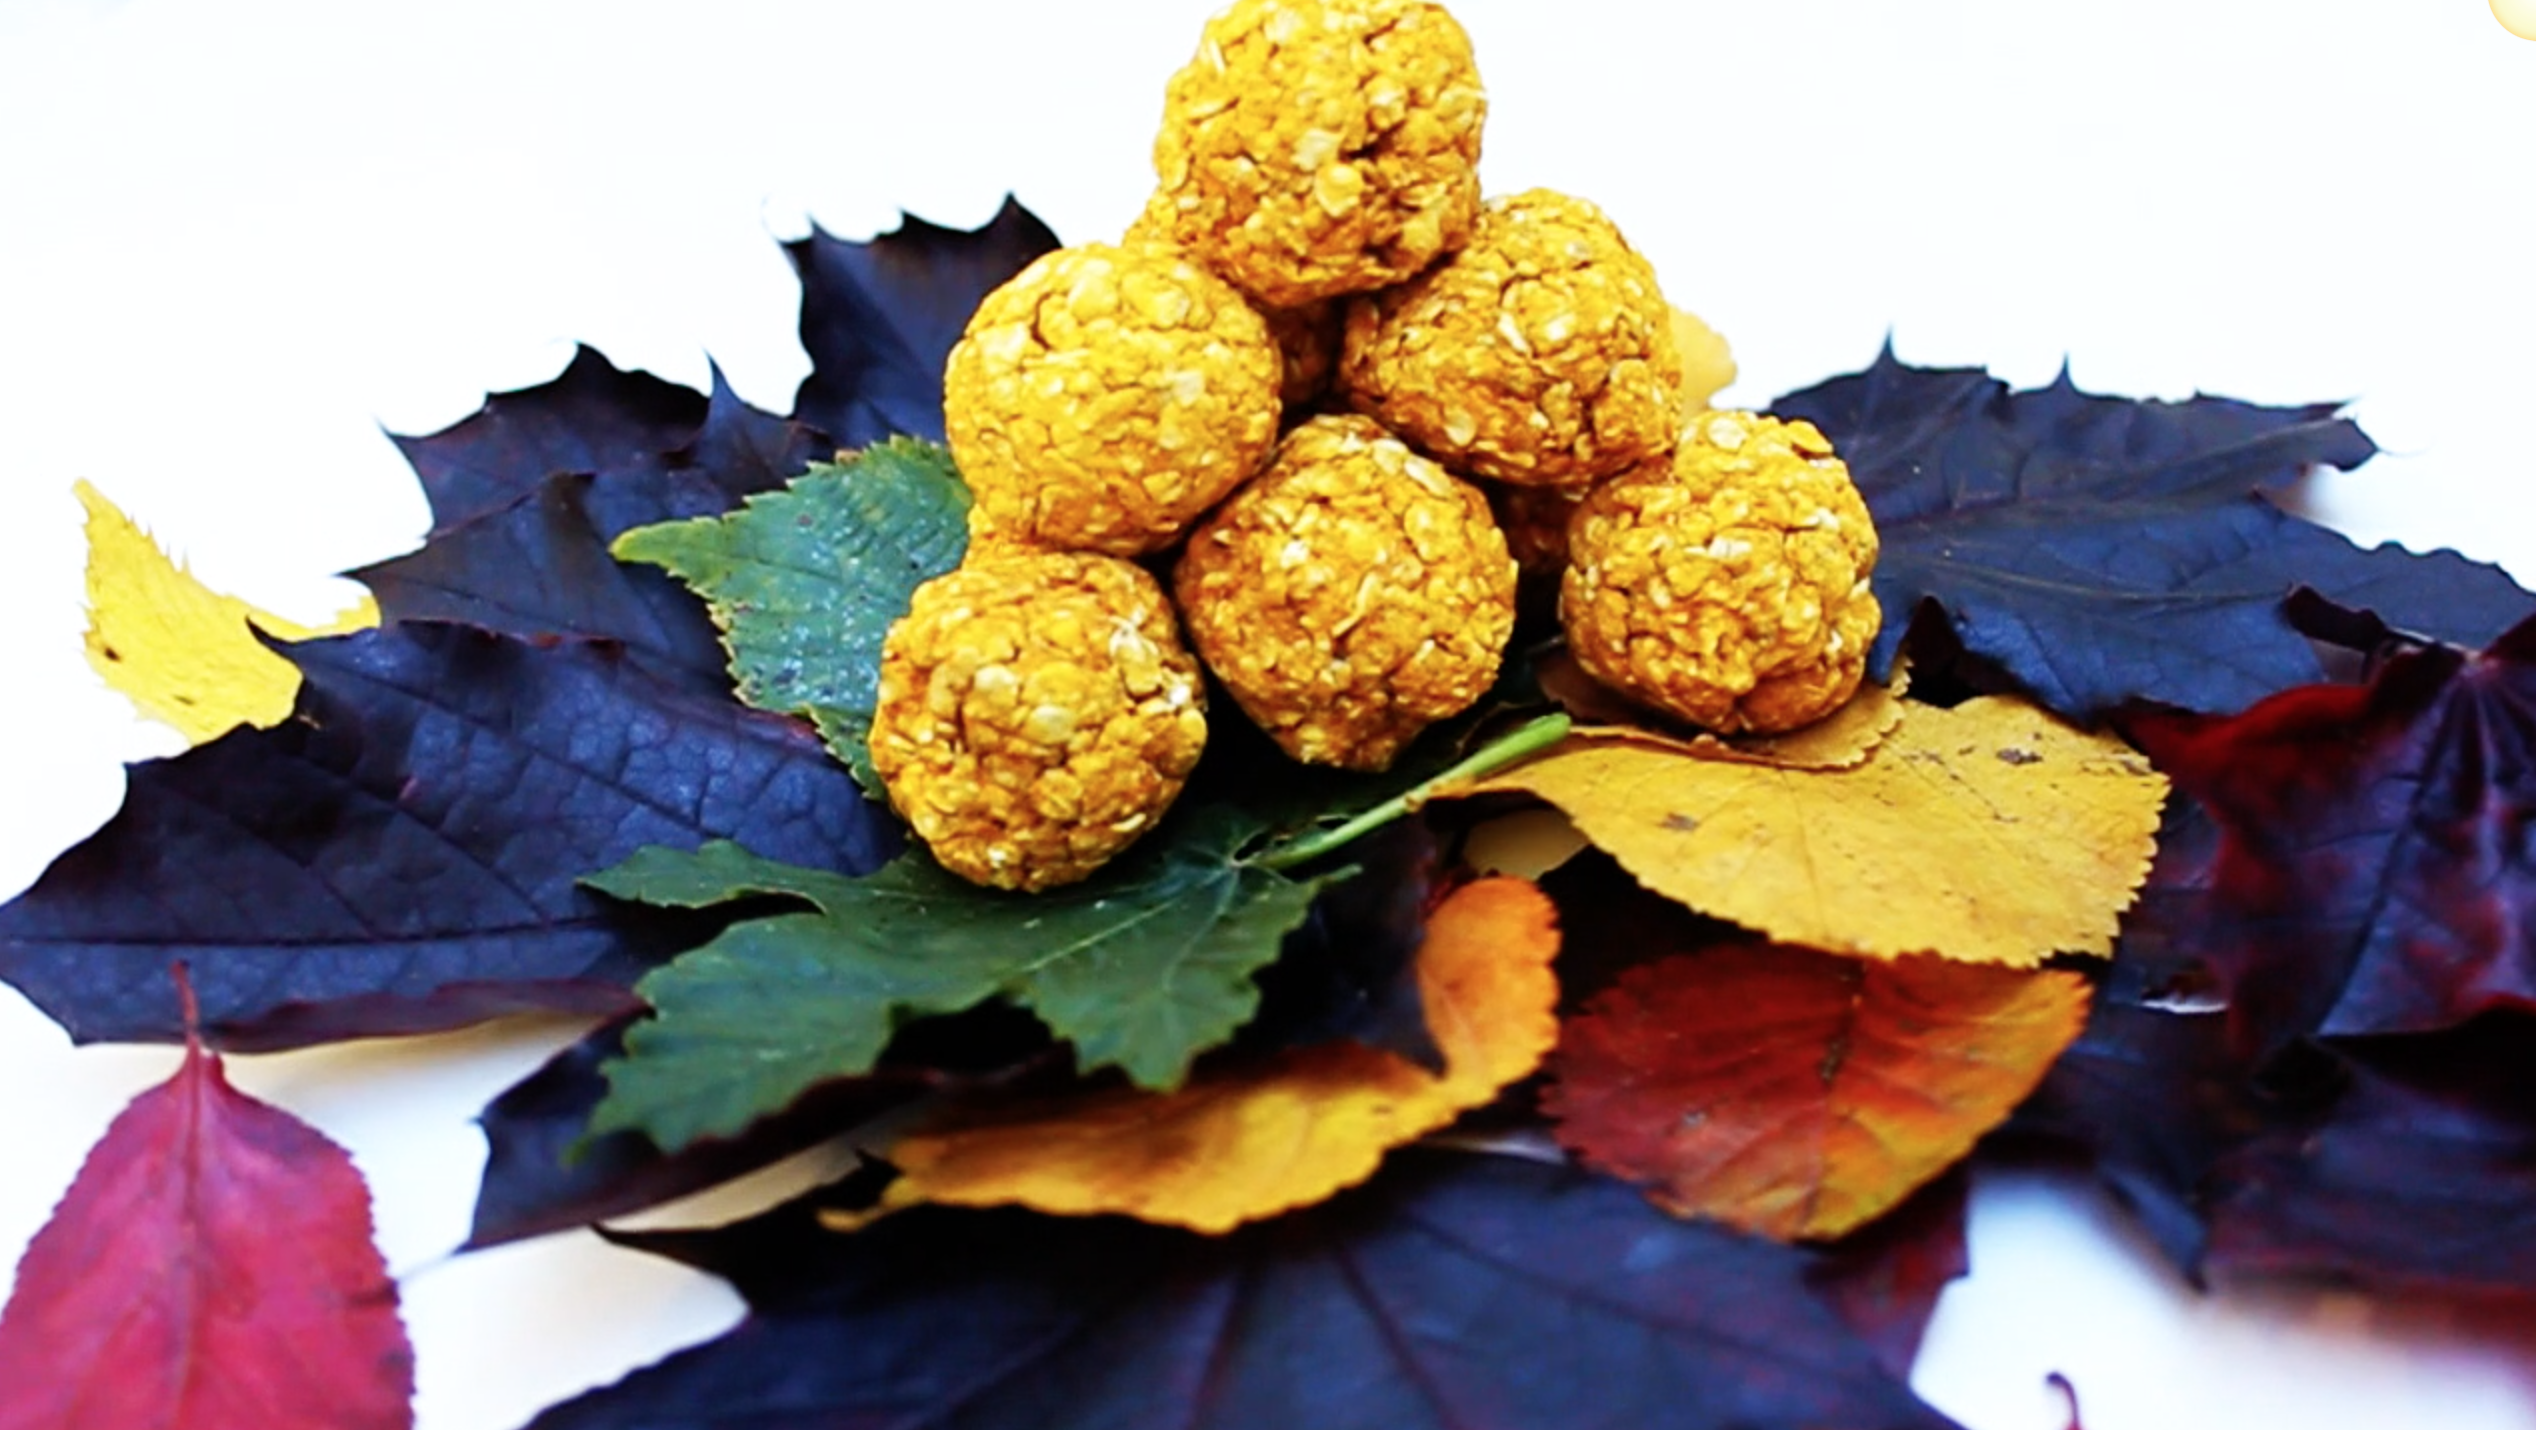 Pumpkin and cinnamon dog treat truffles helping calm dog anxiety in autumn for the dogbuddy blog